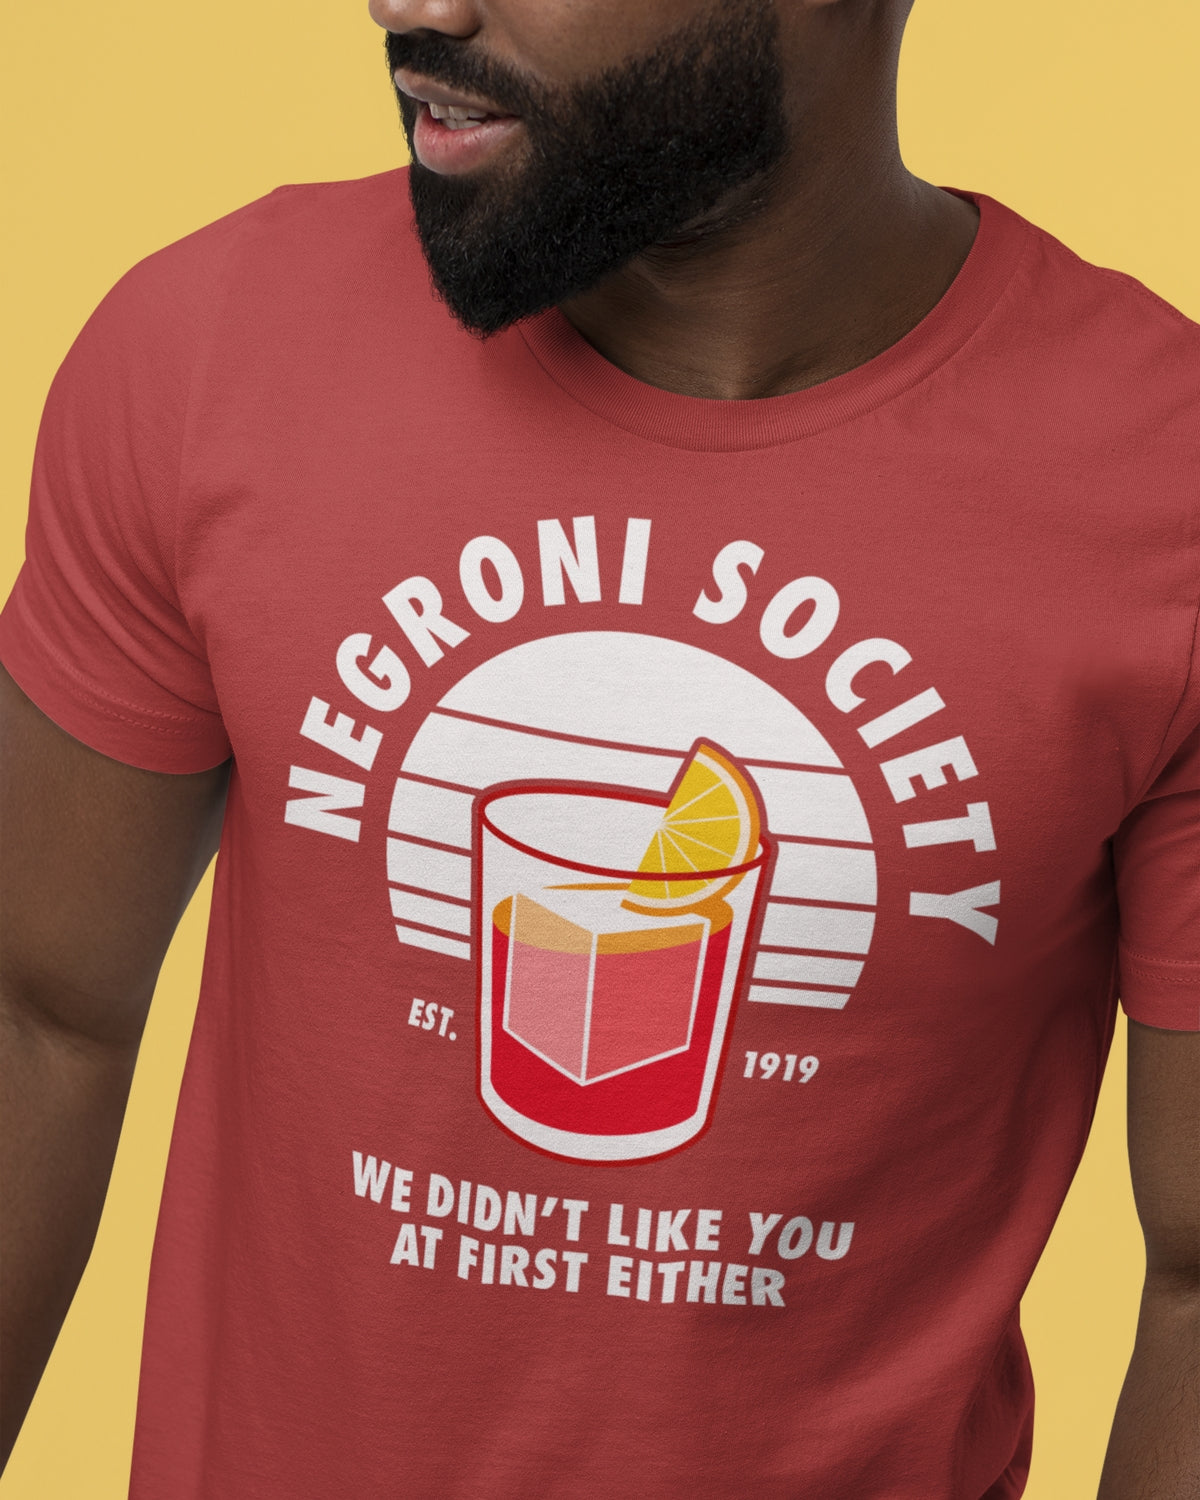 Negroni Society Cocktail Shirt by Cocktail Critters